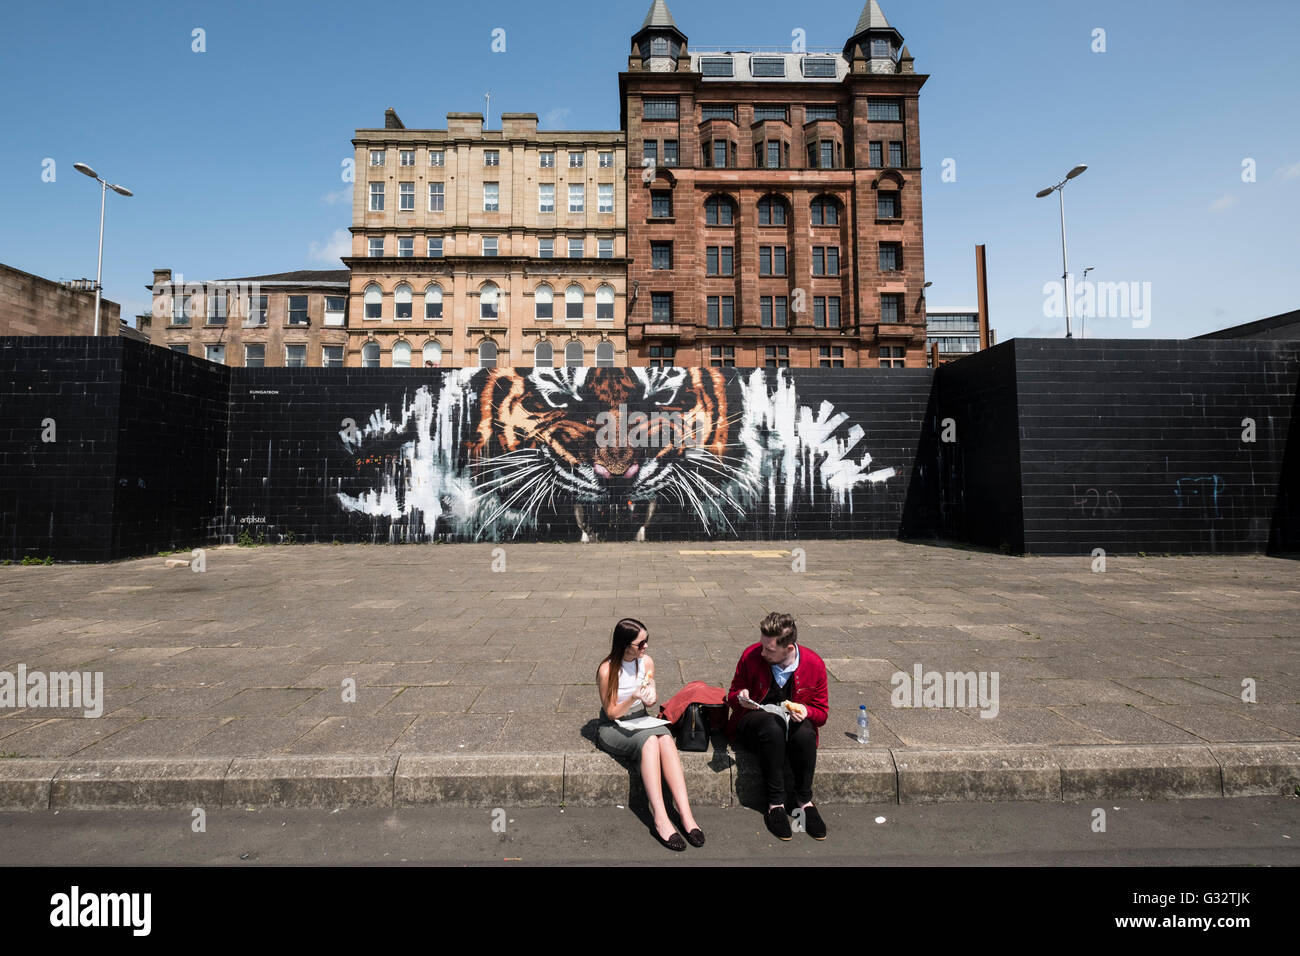 Tiger street art Mural on wall in central Glasgow, Scotland , United Kingdom Stock Photo